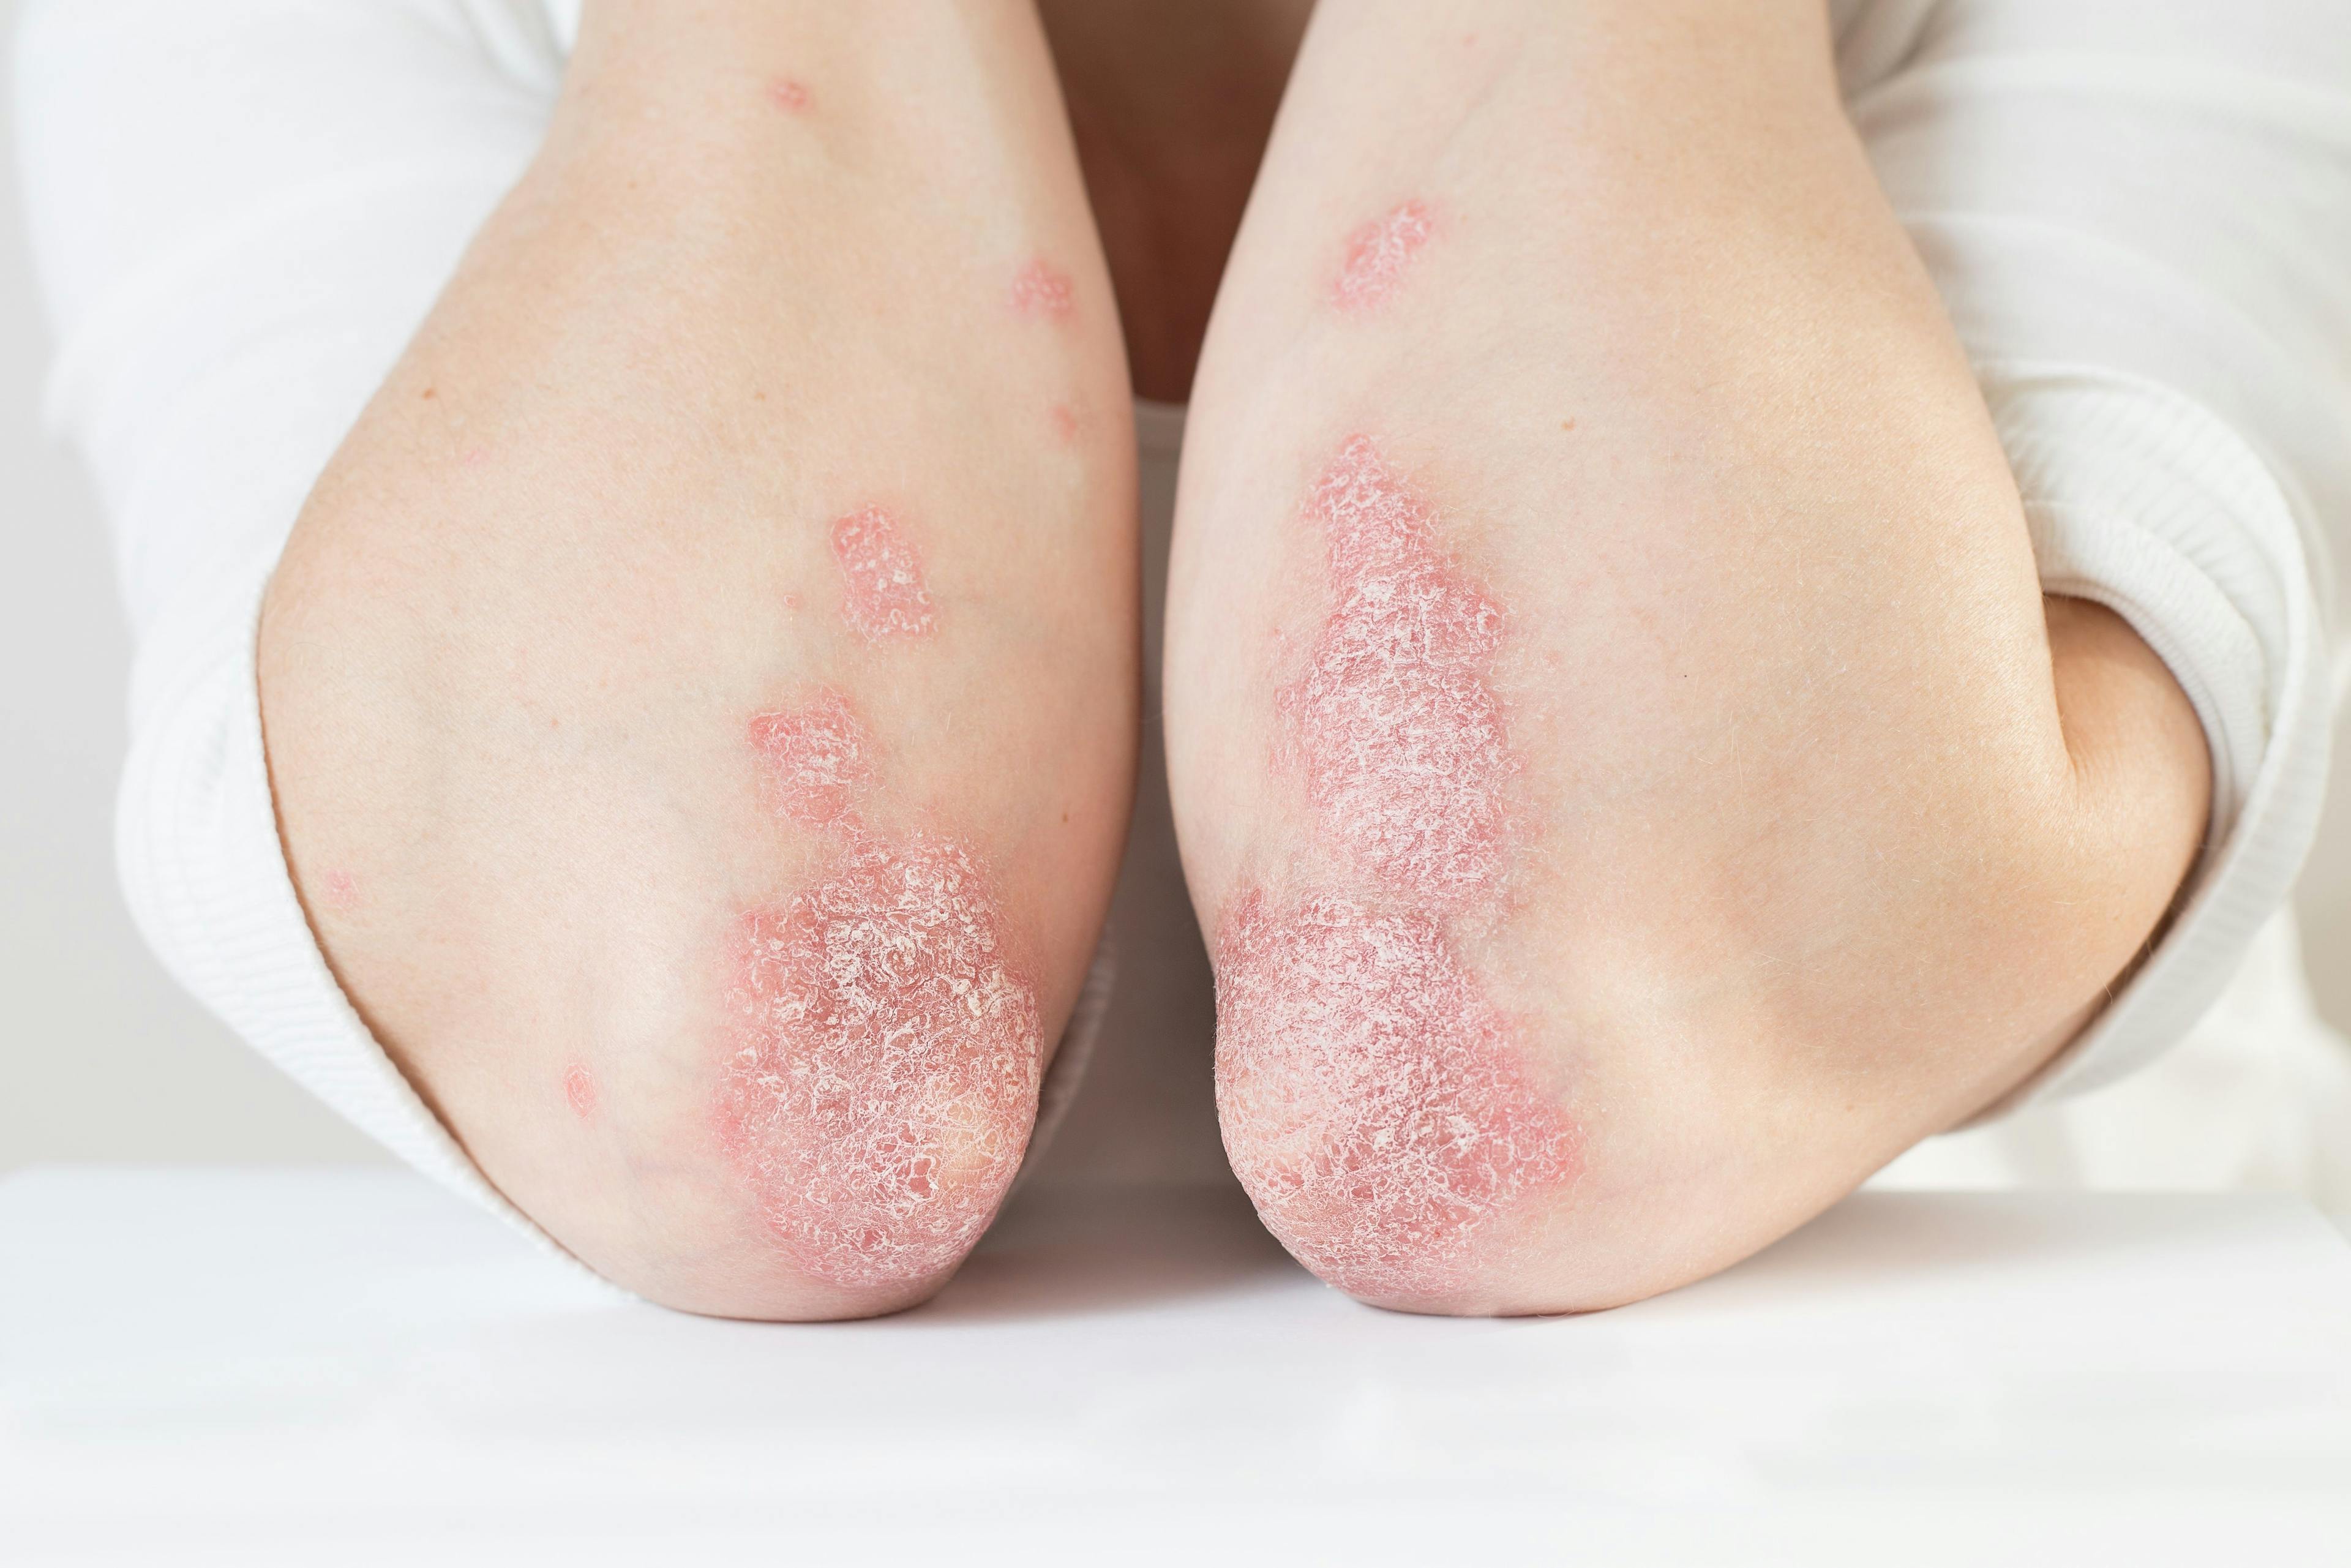 psoriasis plaques on elbows